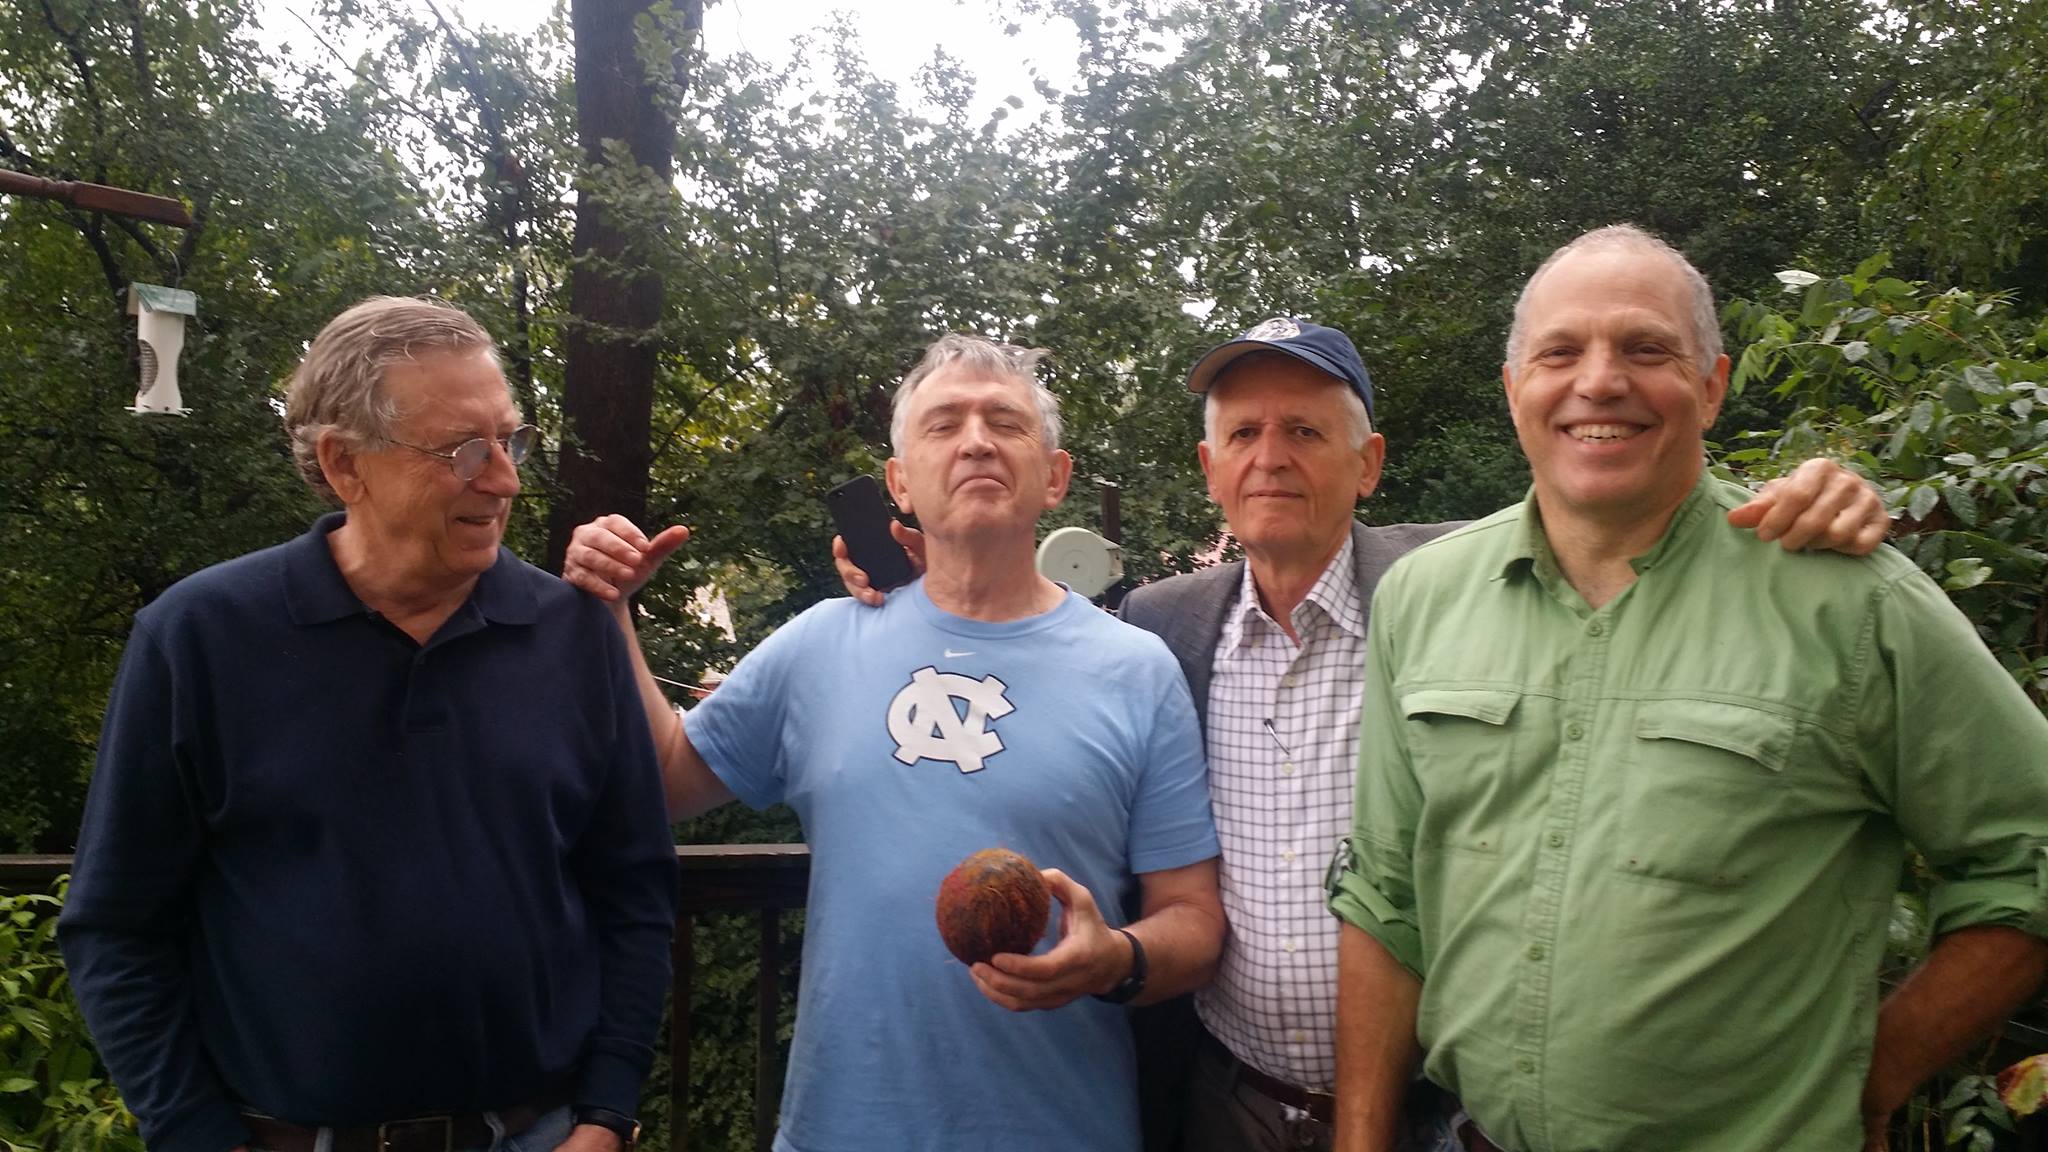 Jack Bailey, Stephen Hoyt, Scott Ward, and Mark Handy at Mark's retirement party in October 2015